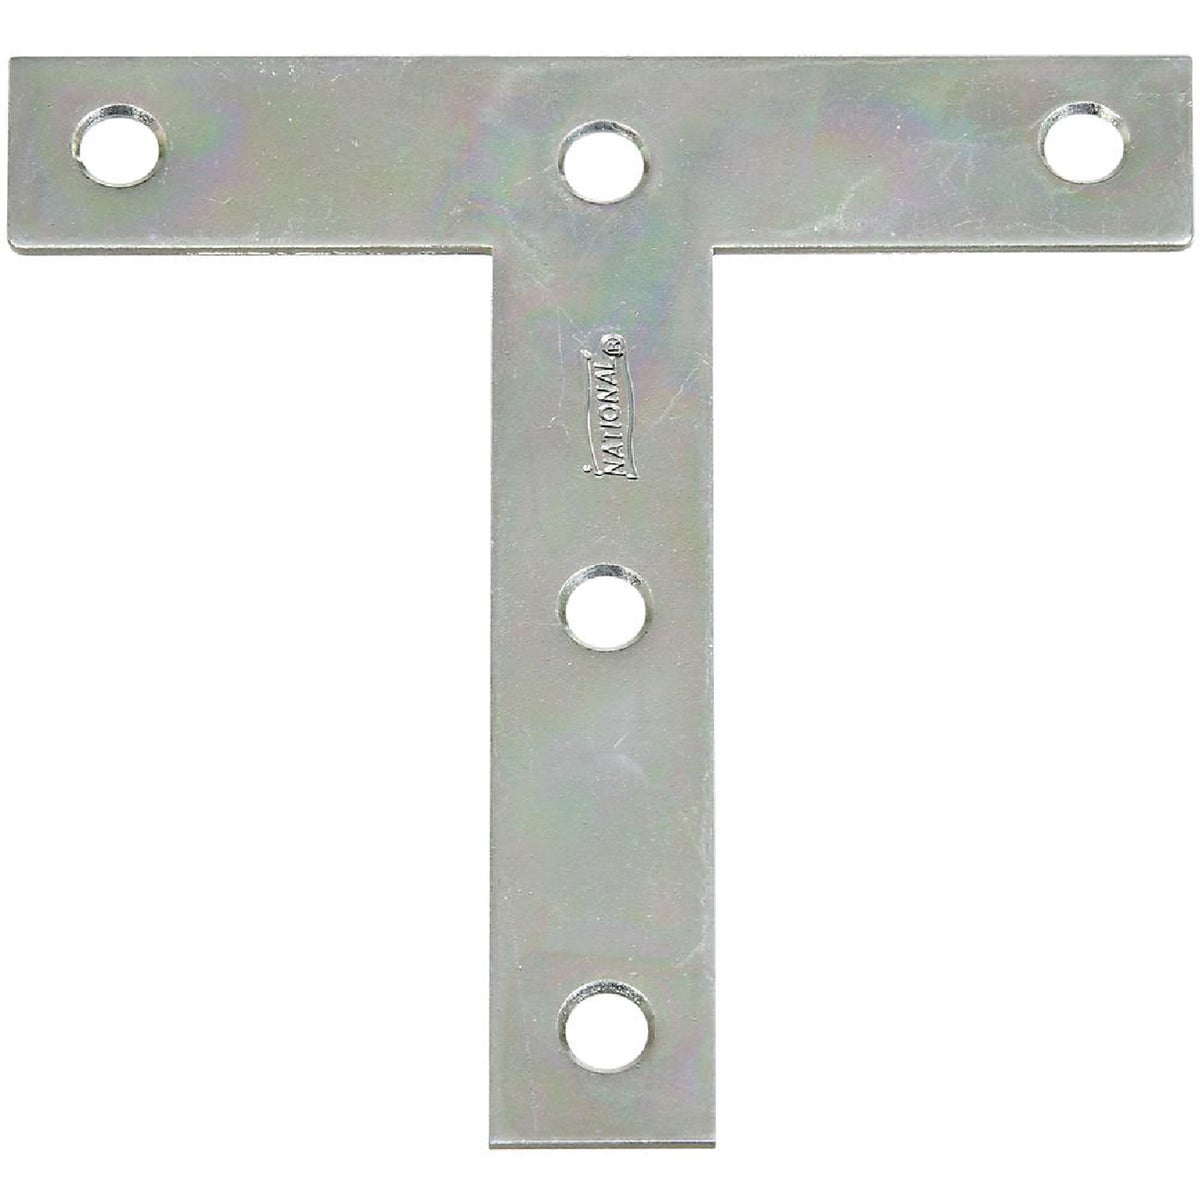 National Catalog 4 In. x 4 In. Zinc T-Plate